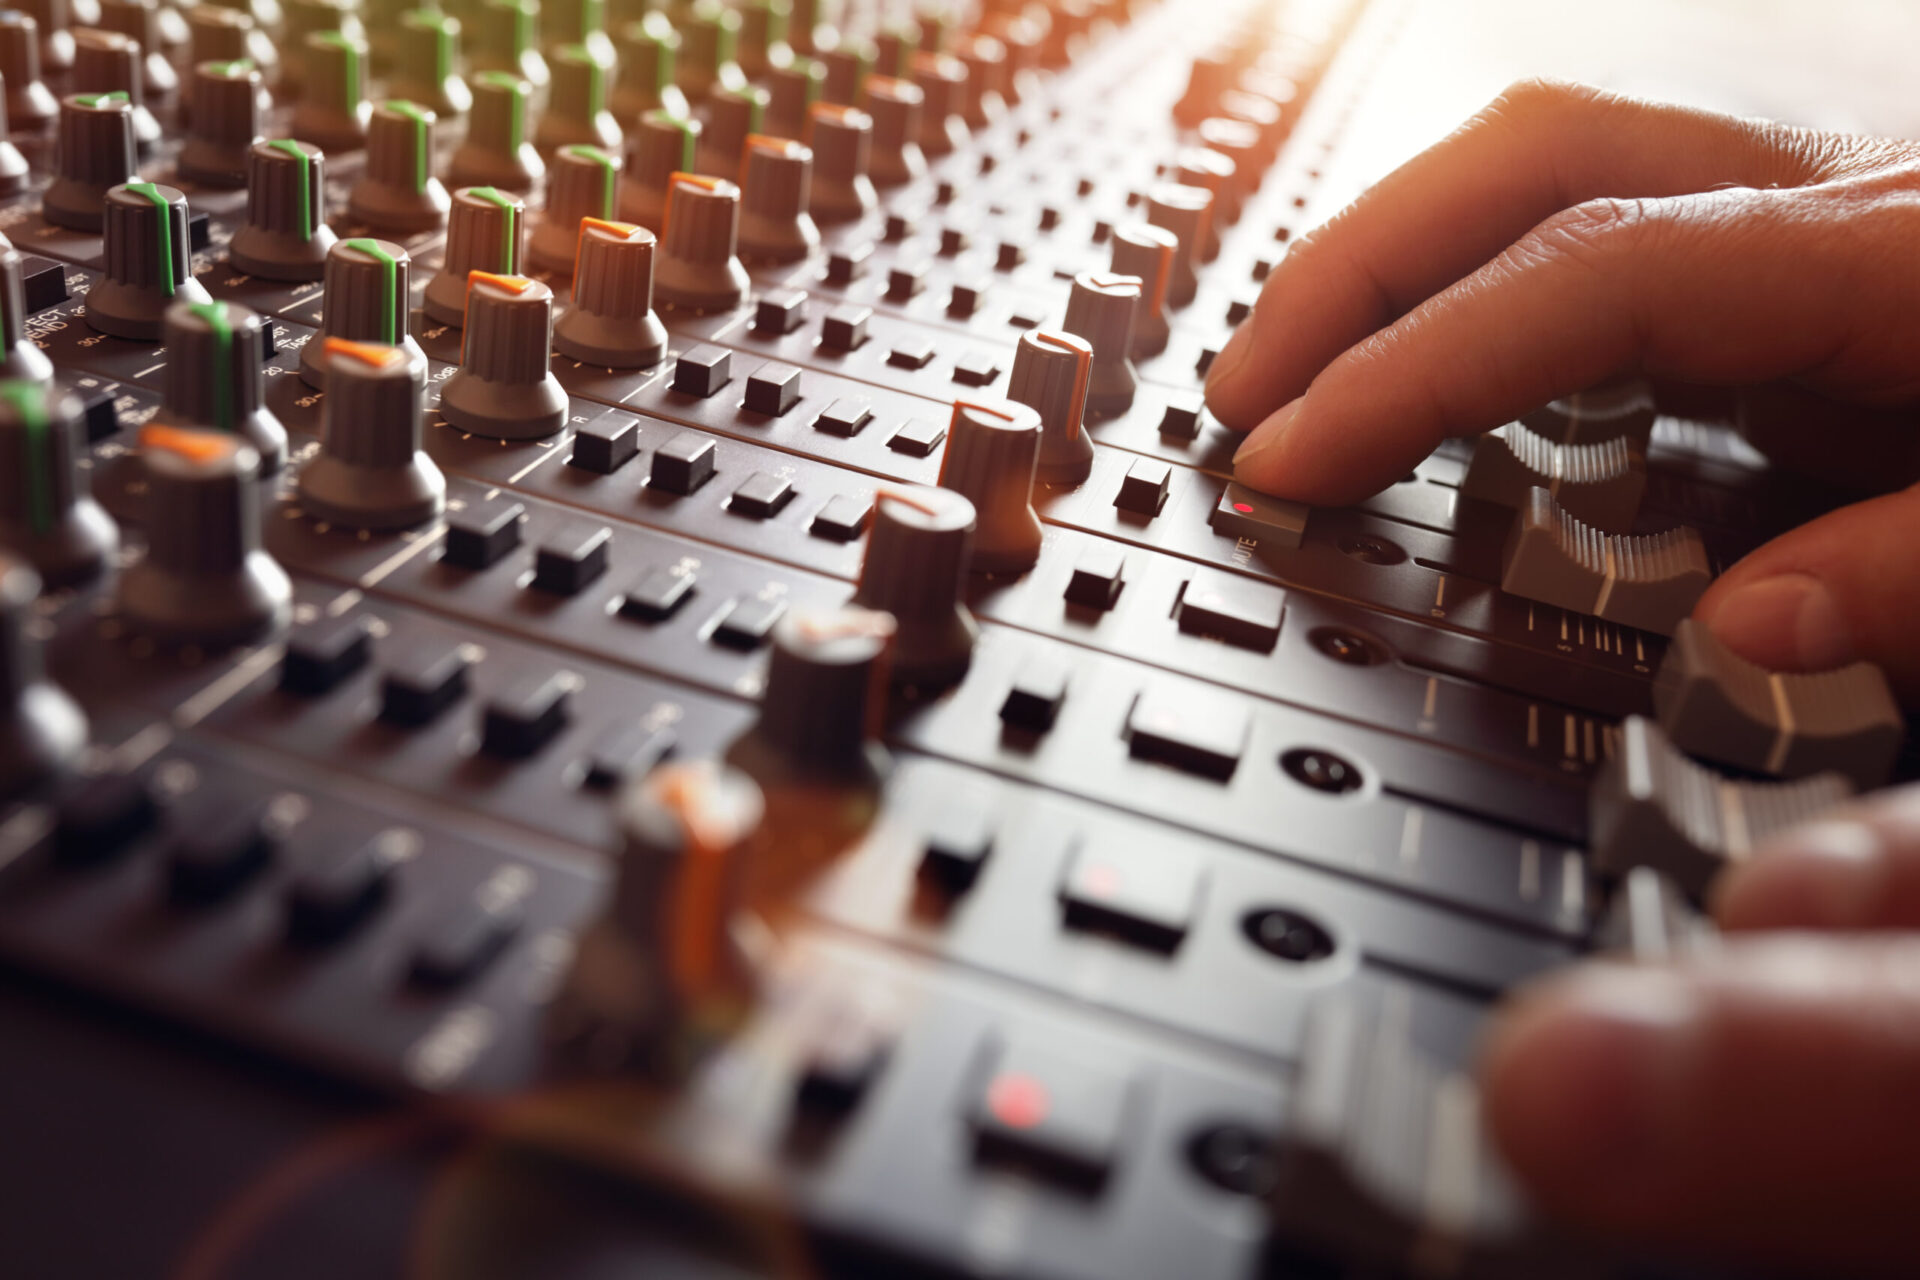 A person is partying while working on a mixing board.